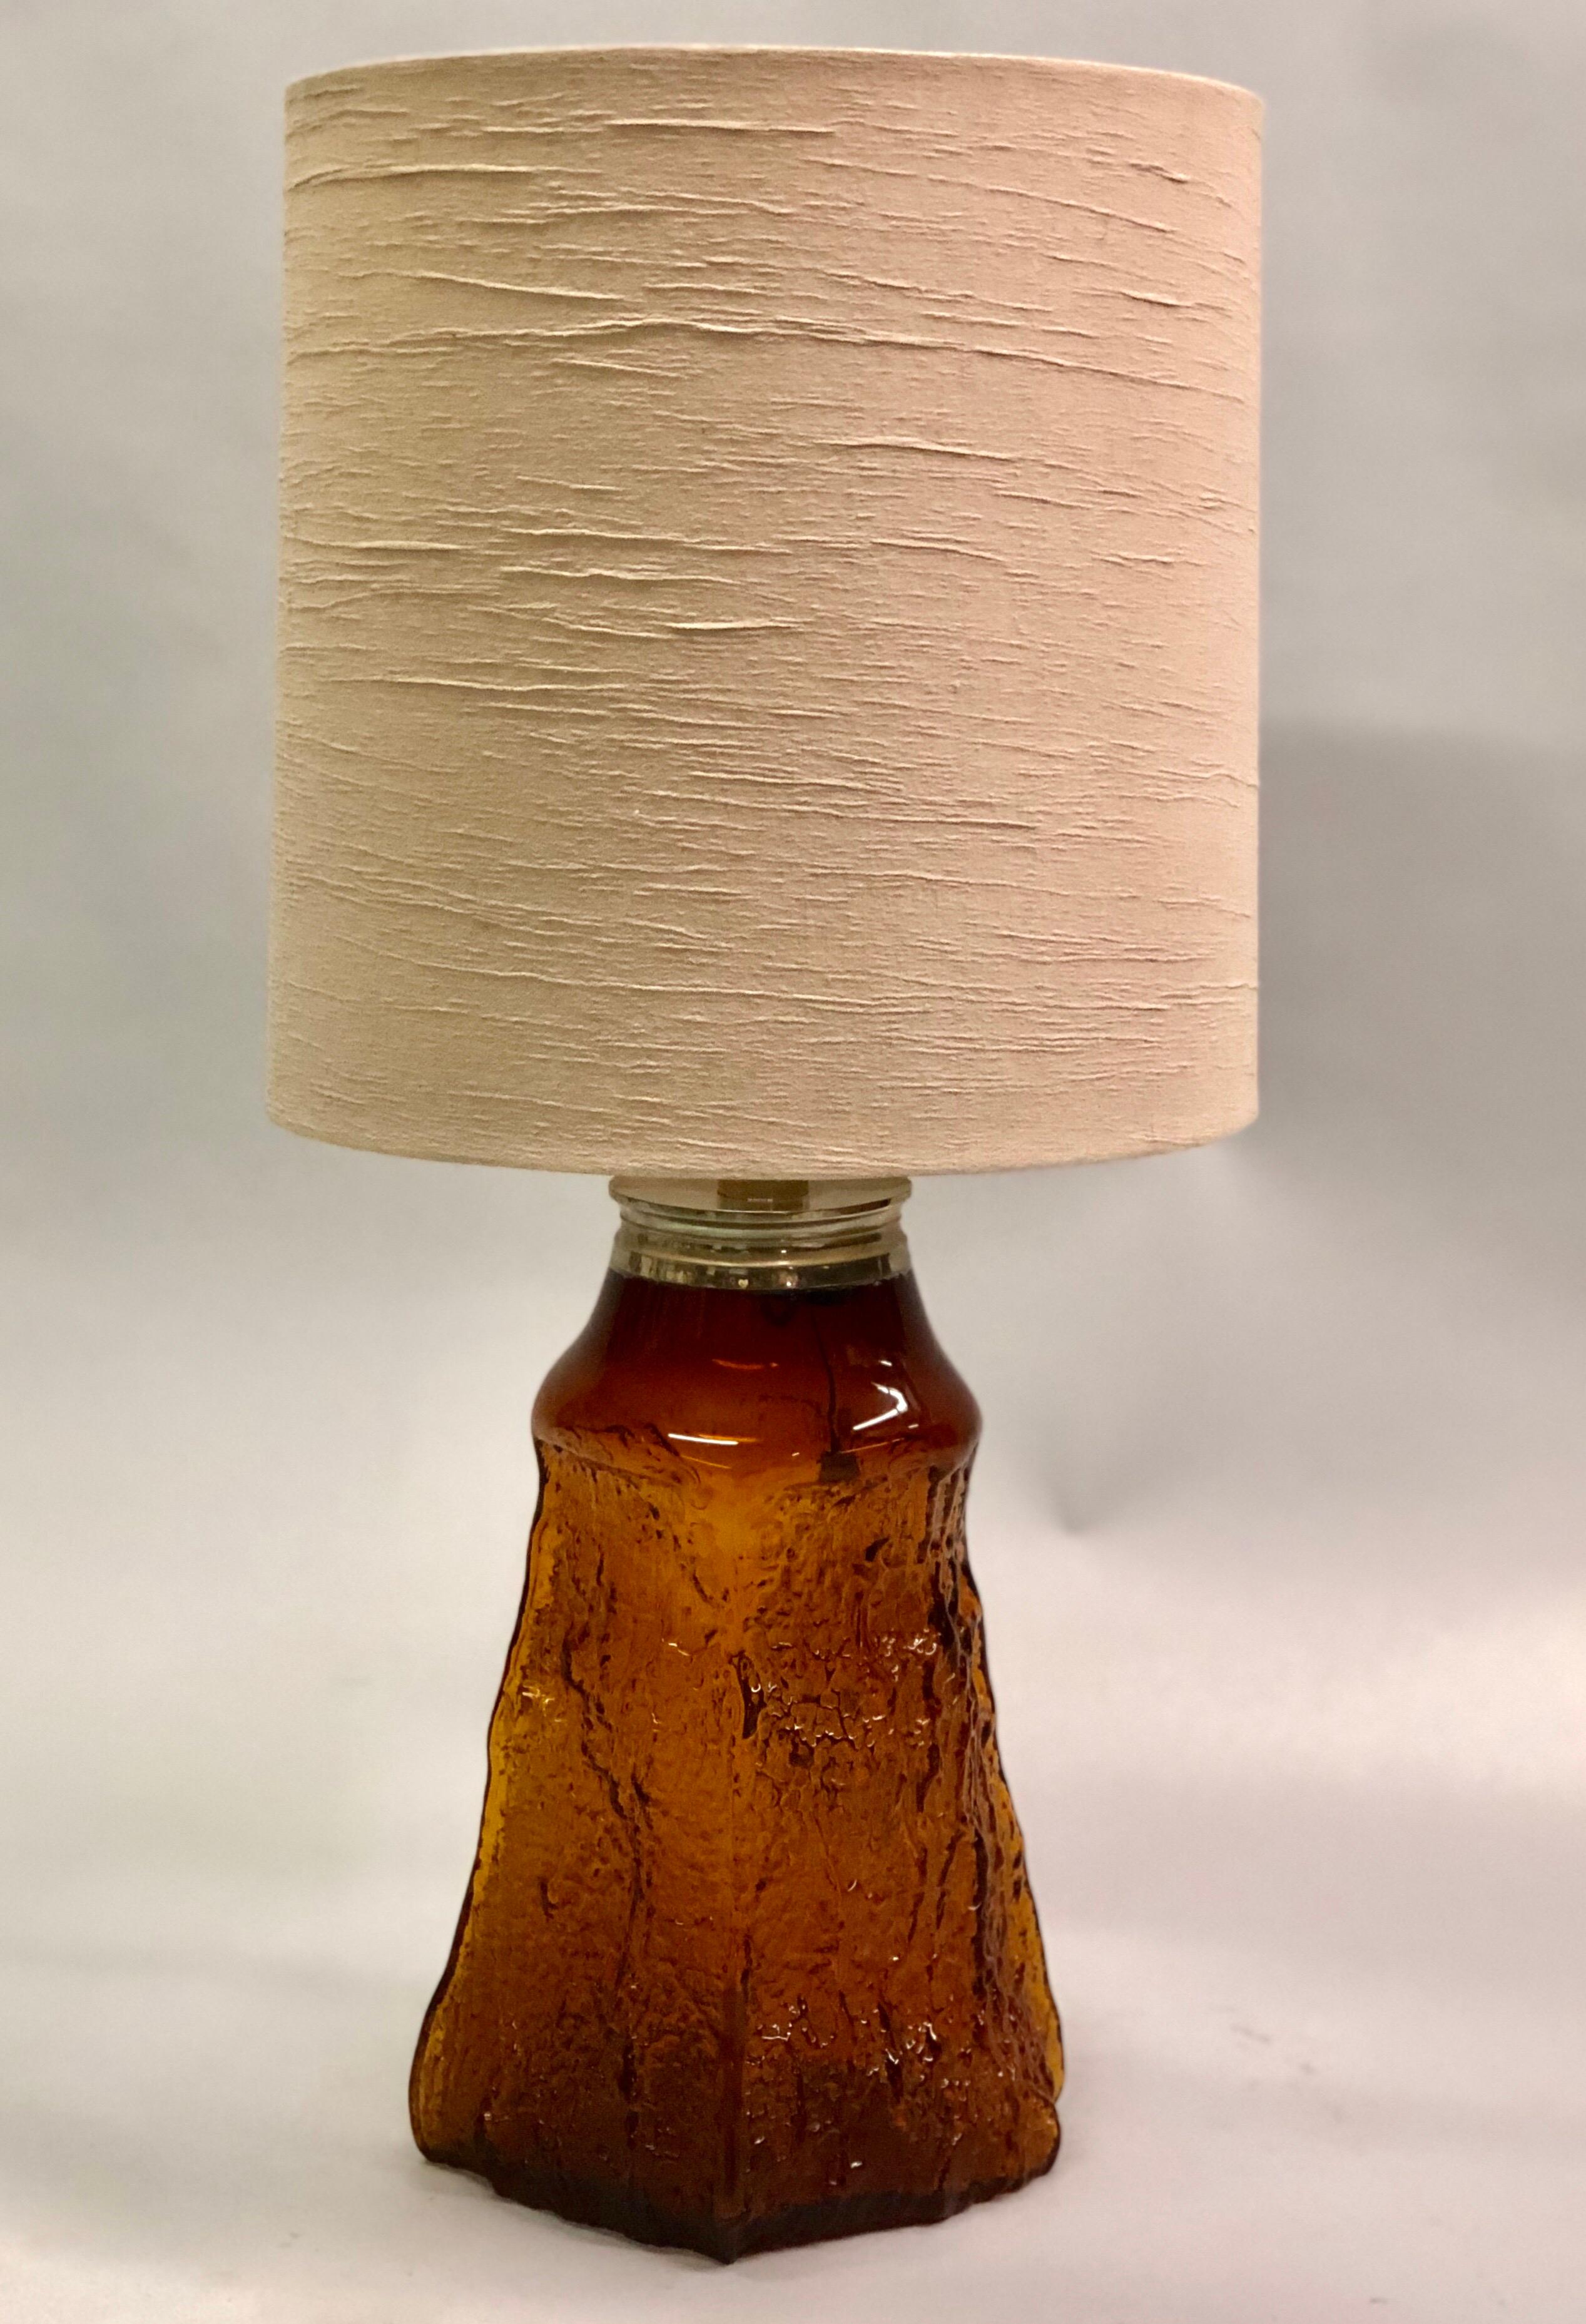 Extraordinary, rare pair of Mid-Century Modern, mold blown, amber glass lamps with an organic surface in beautiful relief. 

The lamps have rare large size and a subtle range of color that reflect light according the depth of relief. Exquisite